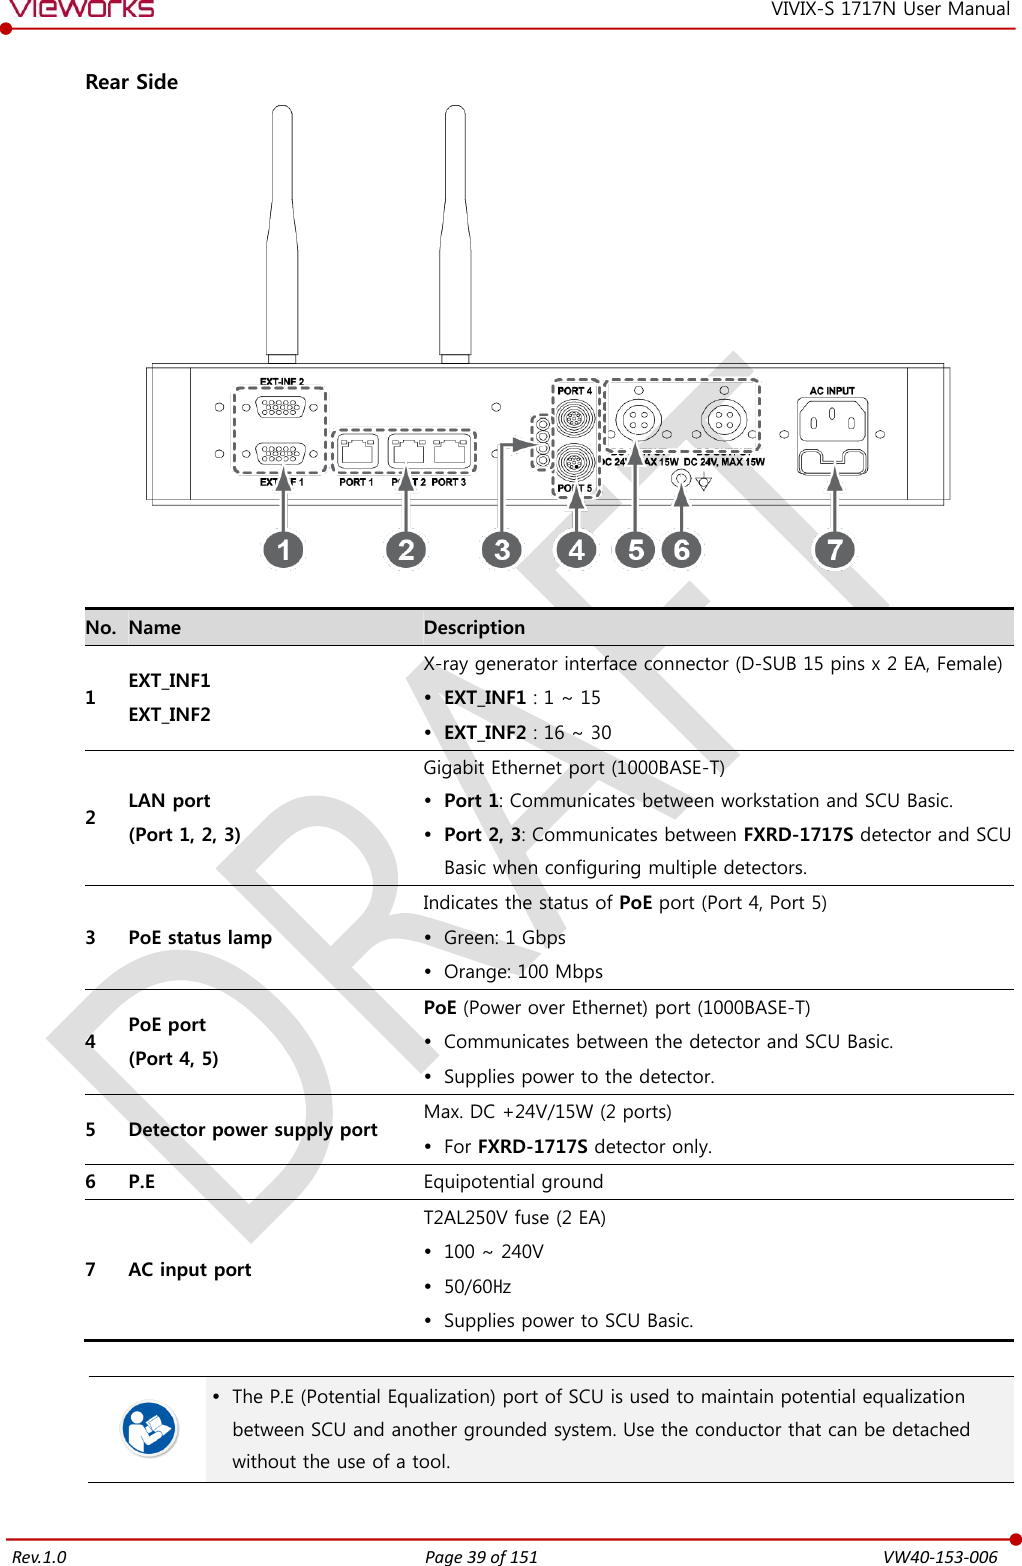   Rev.1.0 Page 39 of 151  VW40-153-006 VIVIX-S 1717N User Manual  Rear Side   No. Name Description 1 EXT_INF1 EXT_INF2 X-ray generator interface connector (D-SUB 15 pins x 2 EA, Female)  EXT_INF1 : 1 ~ 15  EXT_INF2 : 16 ~ 30 2 LAN port (Port 1, 2, 3) Gigabit Ethernet port (1000BASE-T)  Port 1: Communicates between workstation and SCU Basic.  Port 2, 3: Communicates between FXRD-1717S detector and SCU Basic when configuring multiple detectors. 3 PoE status lamp Indicates the status of PoE port (Port 4, Port 5)  Green: 1 Gbps  Orange: 100 Mbps 4 PoE port (Port 4, 5) PoE (Power over Ethernet) port (1000BASE-T)  Communicates between the detector and SCU Basic.  Supplies power to the detector. 5 Detector power supply port Max. DC +24V/15W (2 ports)  For FXRD-1717S detector only. 6 P.E Equipotential ground 7 AC input port T2AL250V fuse (2 EA)  100 ~ 240V  50/60㎐  Supplies power to SCU Basic.    The P.E (Potential Equalization) port of SCU is used to maintain potential equalization between SCU and another grounded system. Use the conductor that can be detached without the use of a tool.  